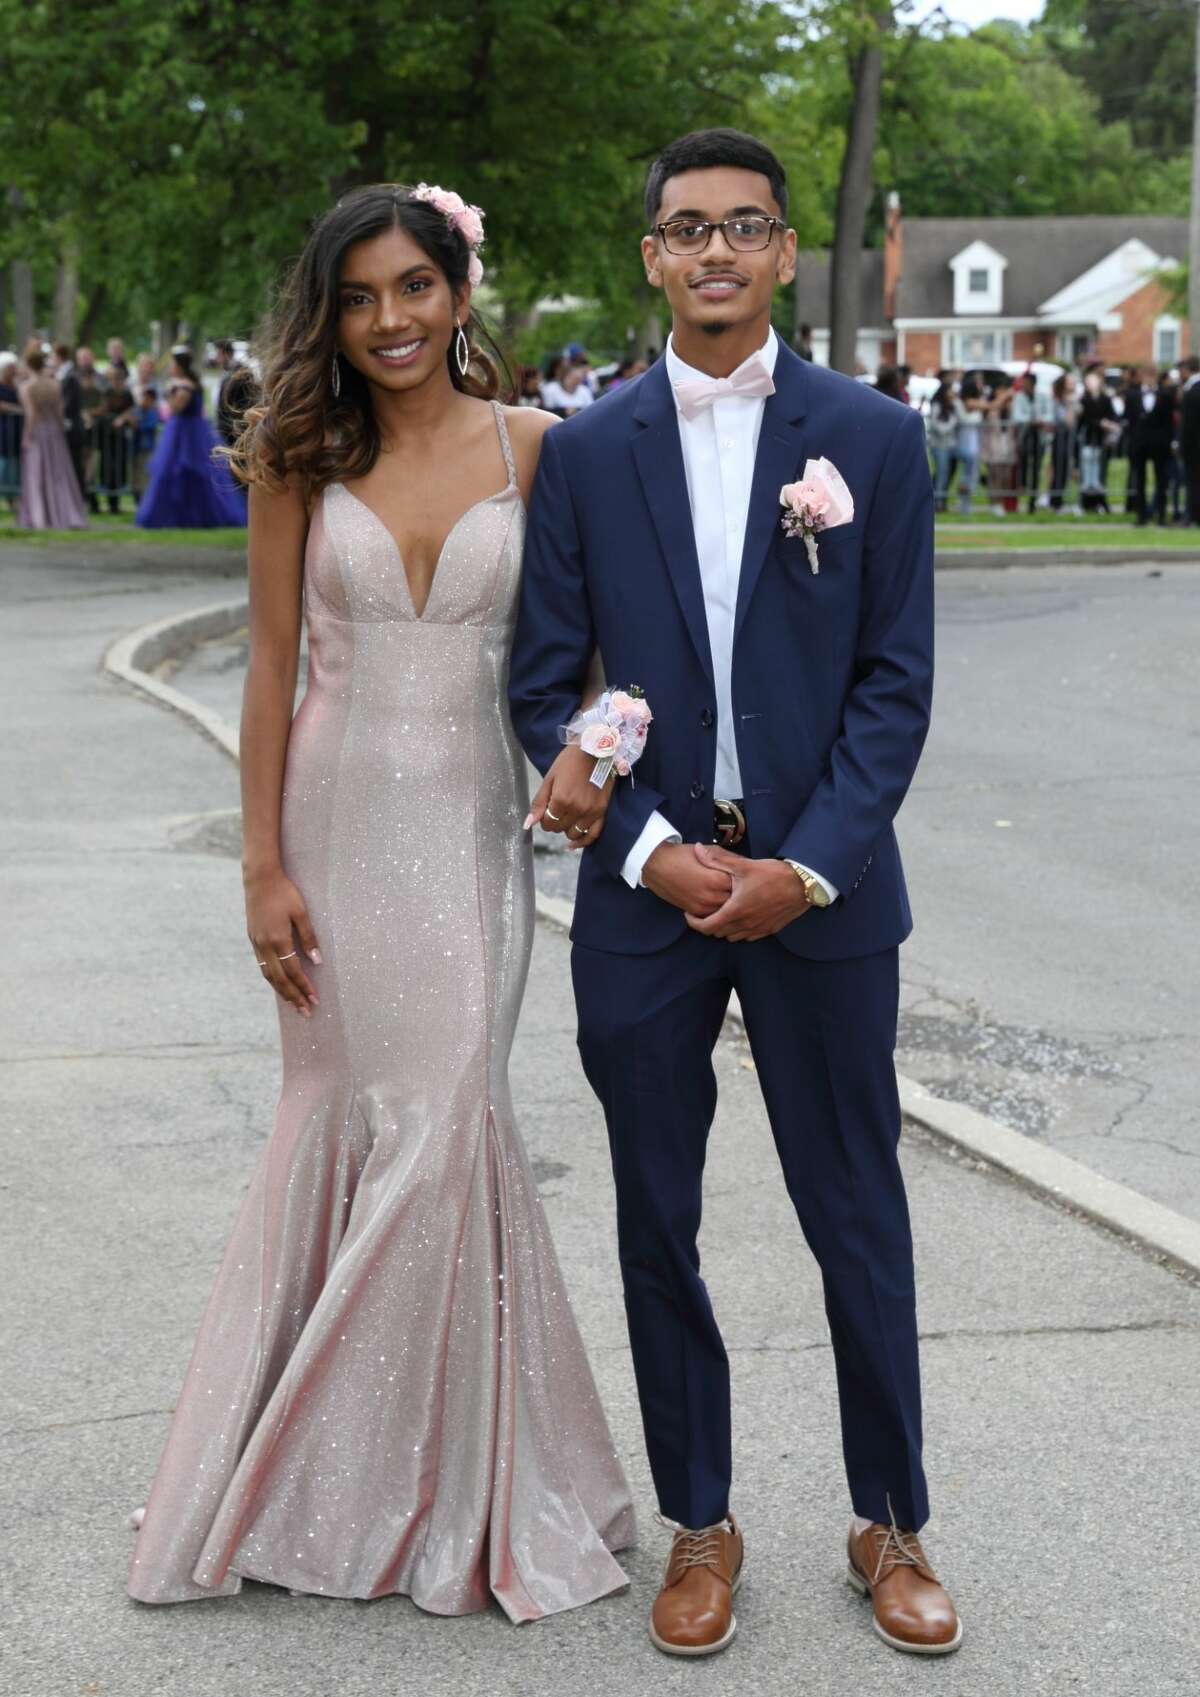 Were you Seen at the Schenectady High School Junior/Senior prom walk-in at the high school on Friday, June 14, 2019?